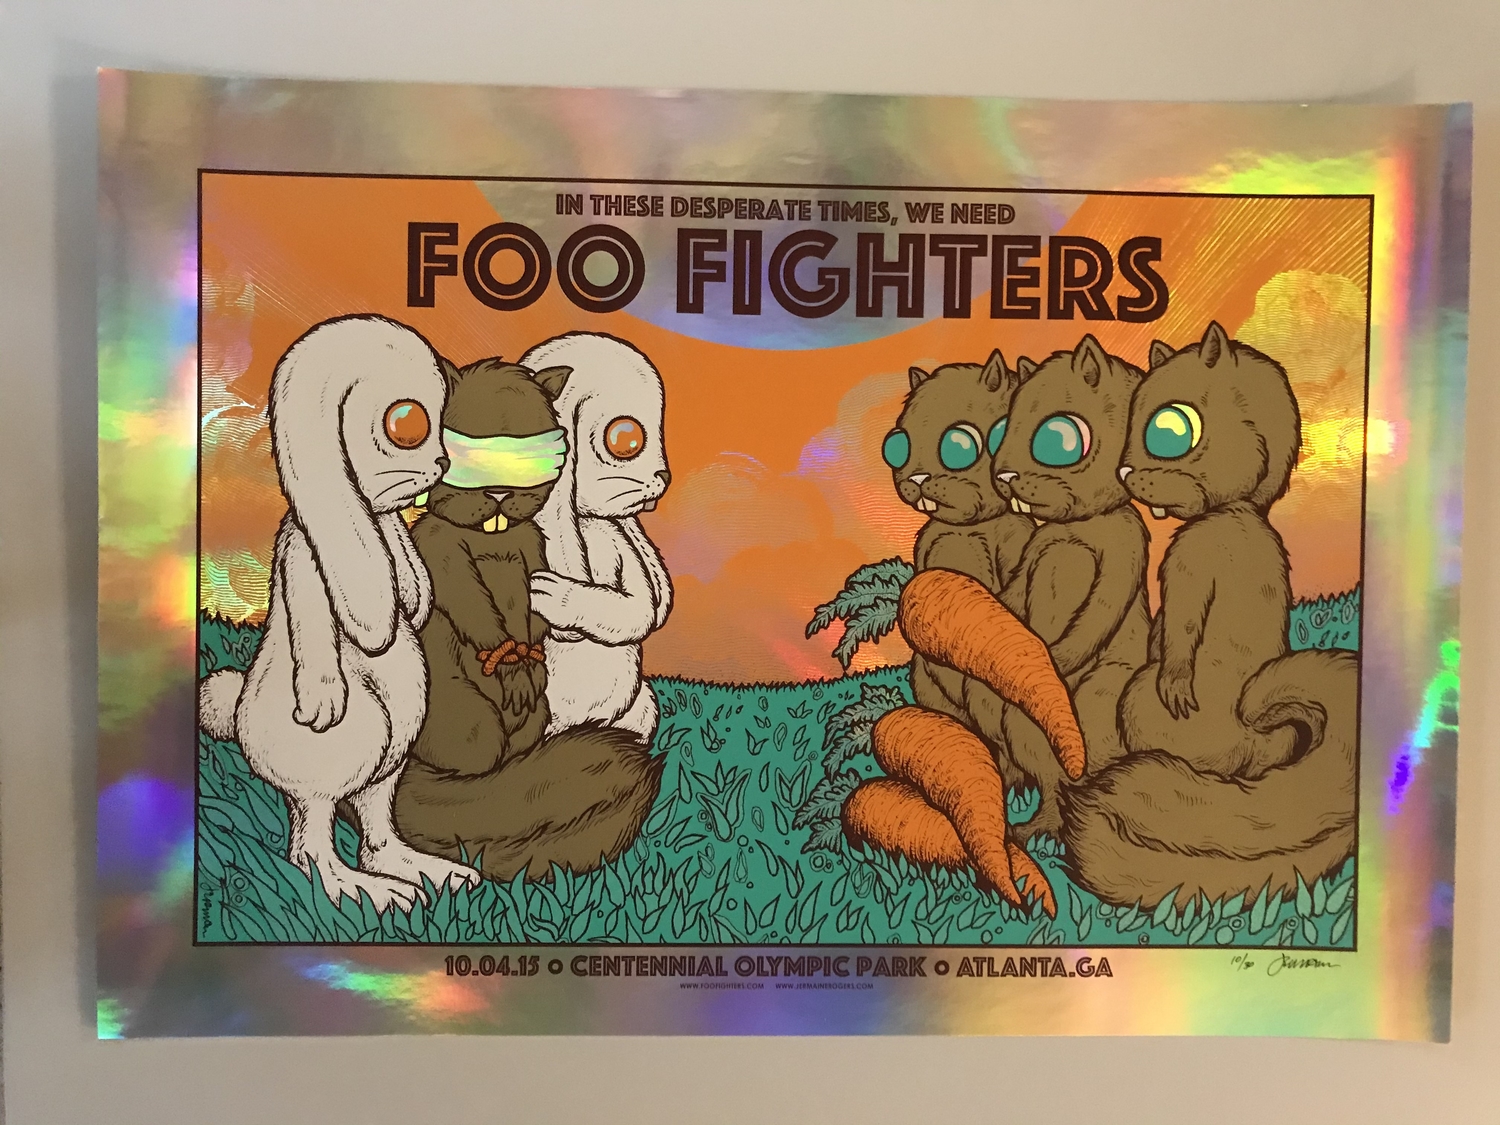 Jermaine Rogers - Foo Fighters Olypic Park, Atlanta 10.04.15 - Limited Concert Poster